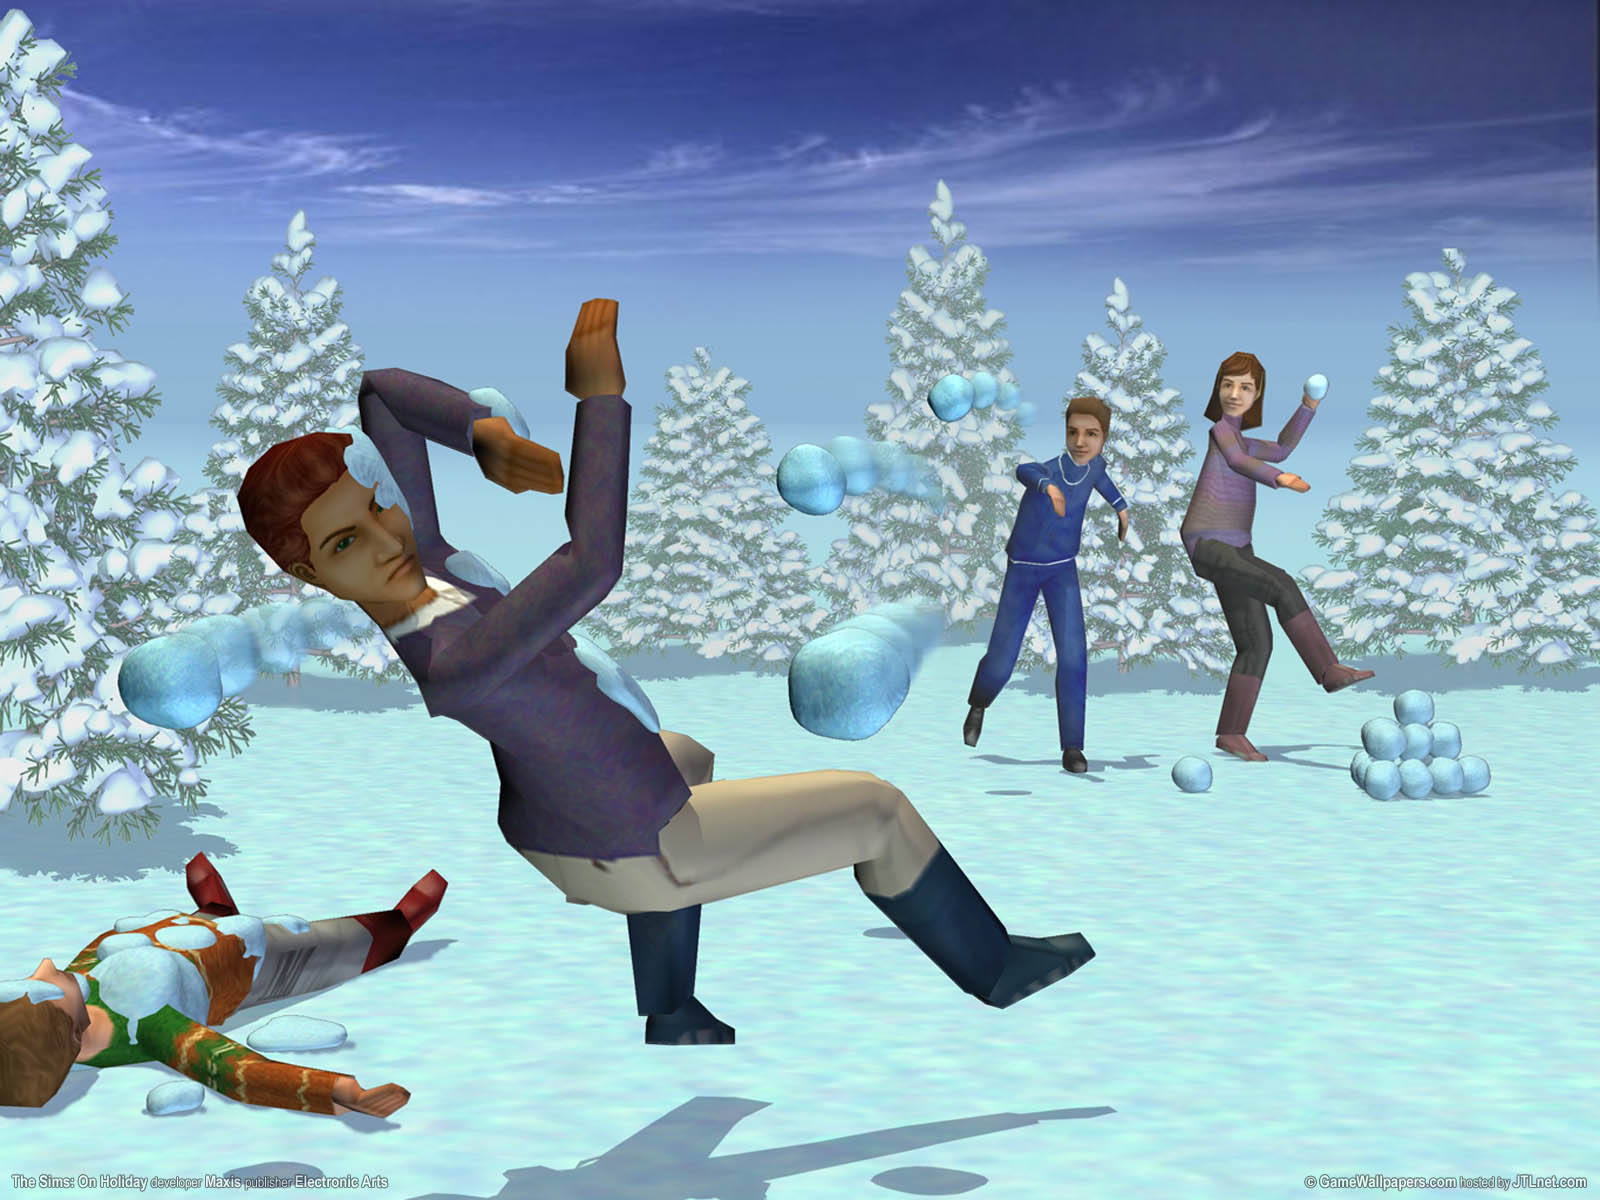 The Sims: On Holiday fond d'cran 01 1600x1200